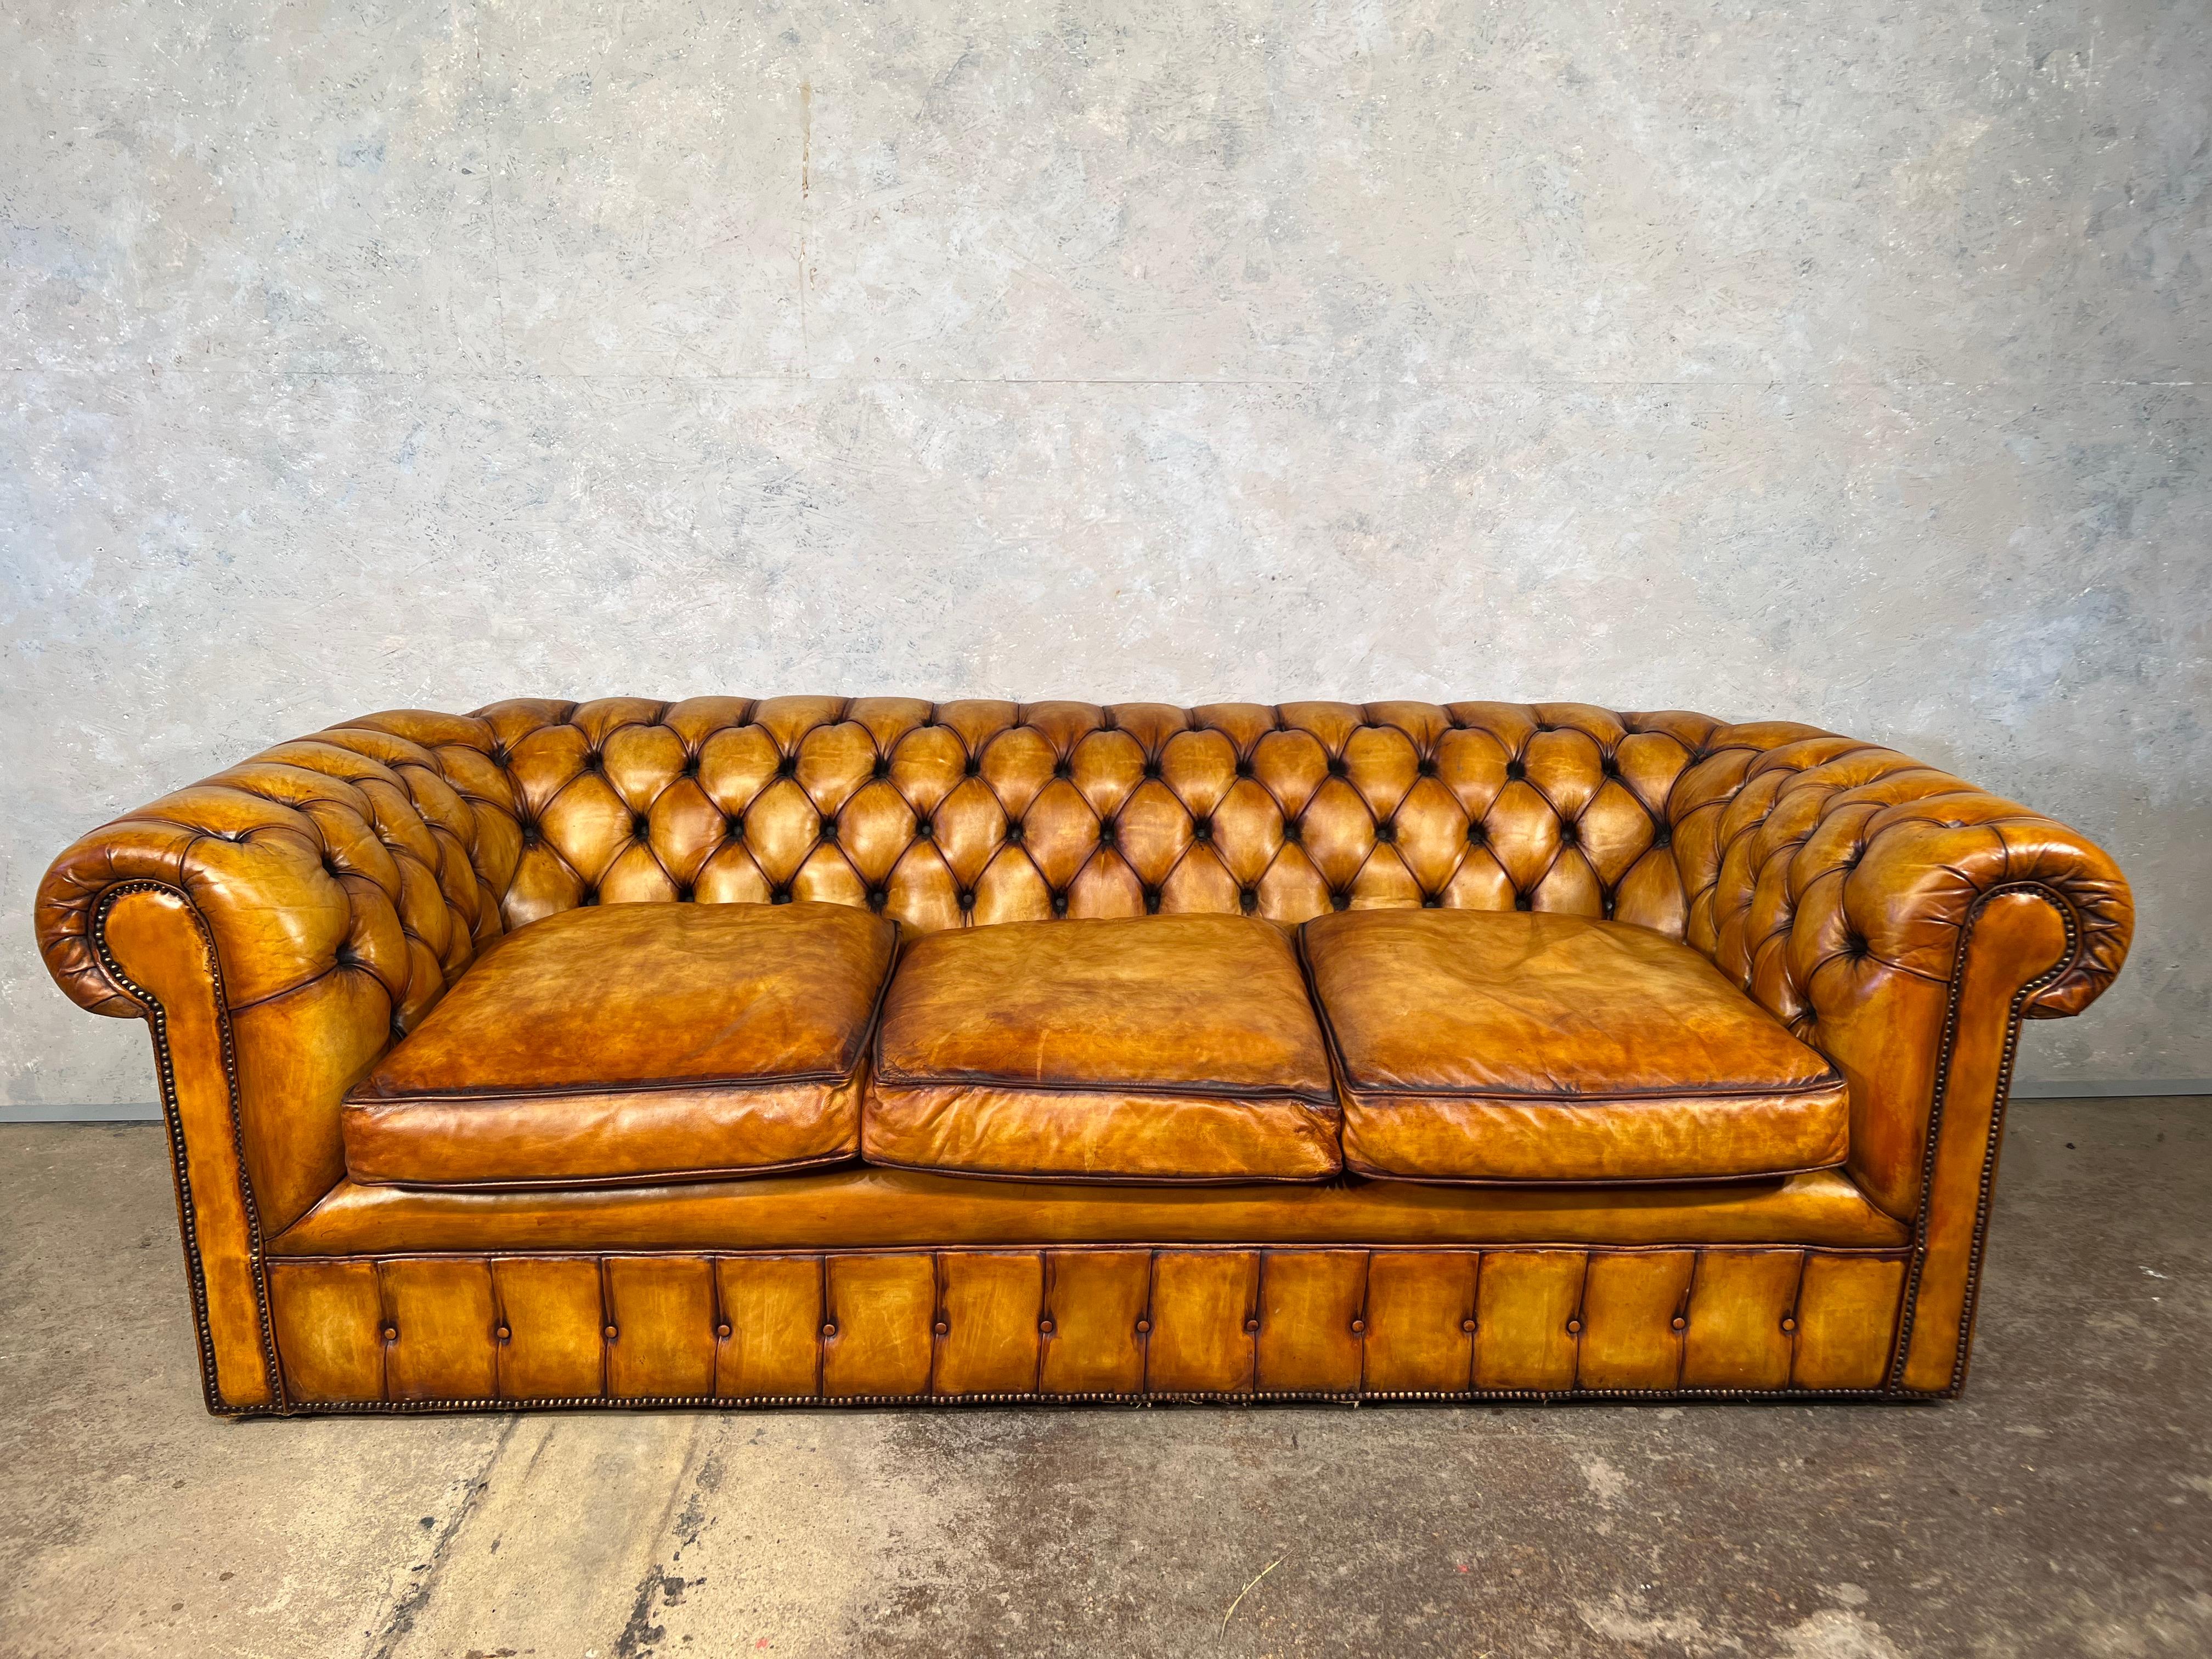 An exceptional mid-century leather chesterfield, a great size, being long and deep in proportions, Great quality leather, very supple and soft, the cushions are feather filled for extra comfort.

In excellent condition, Hand dyed with a beautiful